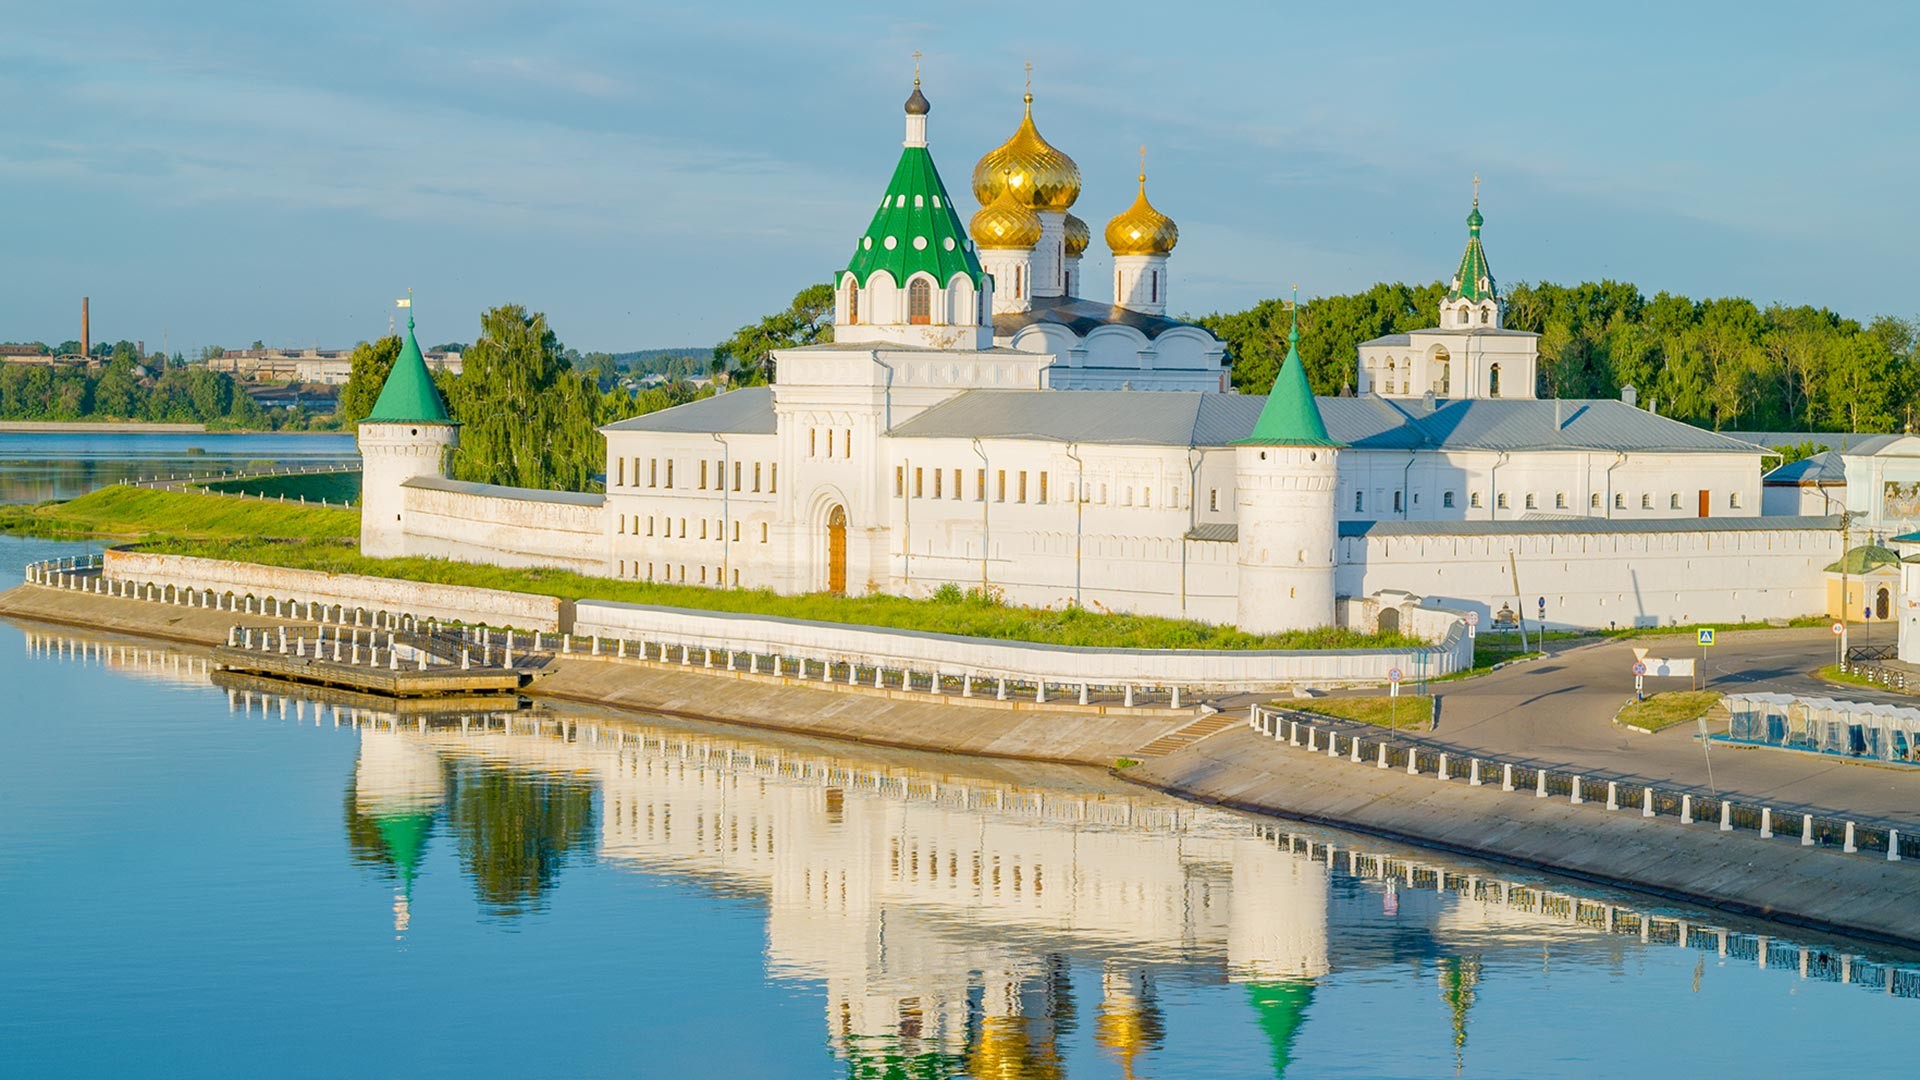 Ipatiev Monastery on the bank of the Kostroma River at dawn.